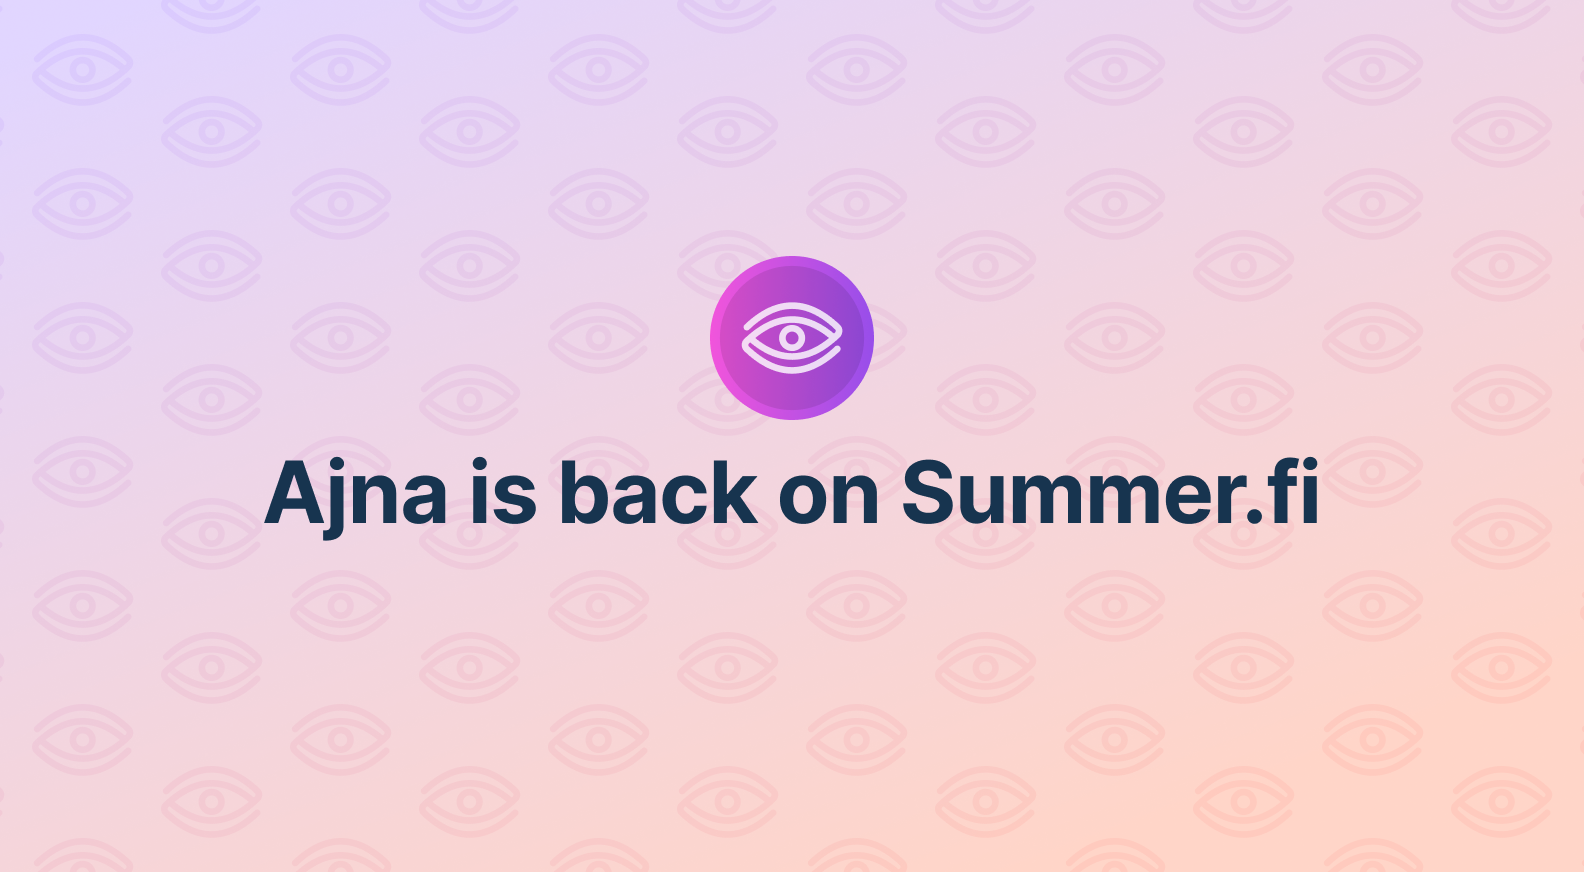 Ajna Relaunches on Summer.fi